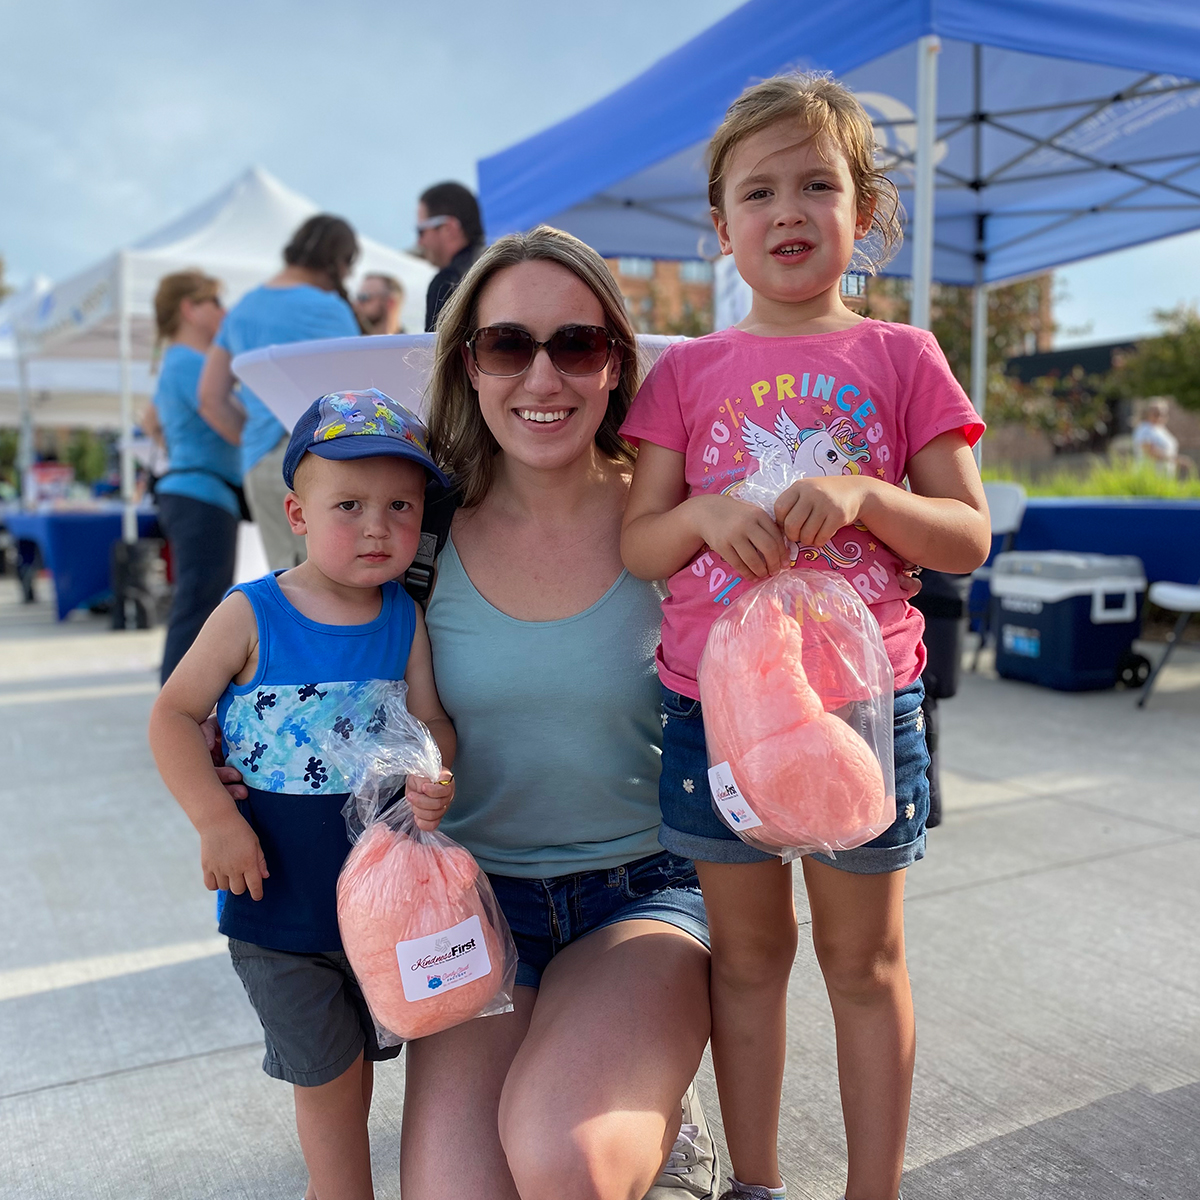 Mother kneels on ground with arms around her two children: an older daughter and younger son. Both children hold a bag of bright pink cotton candy.